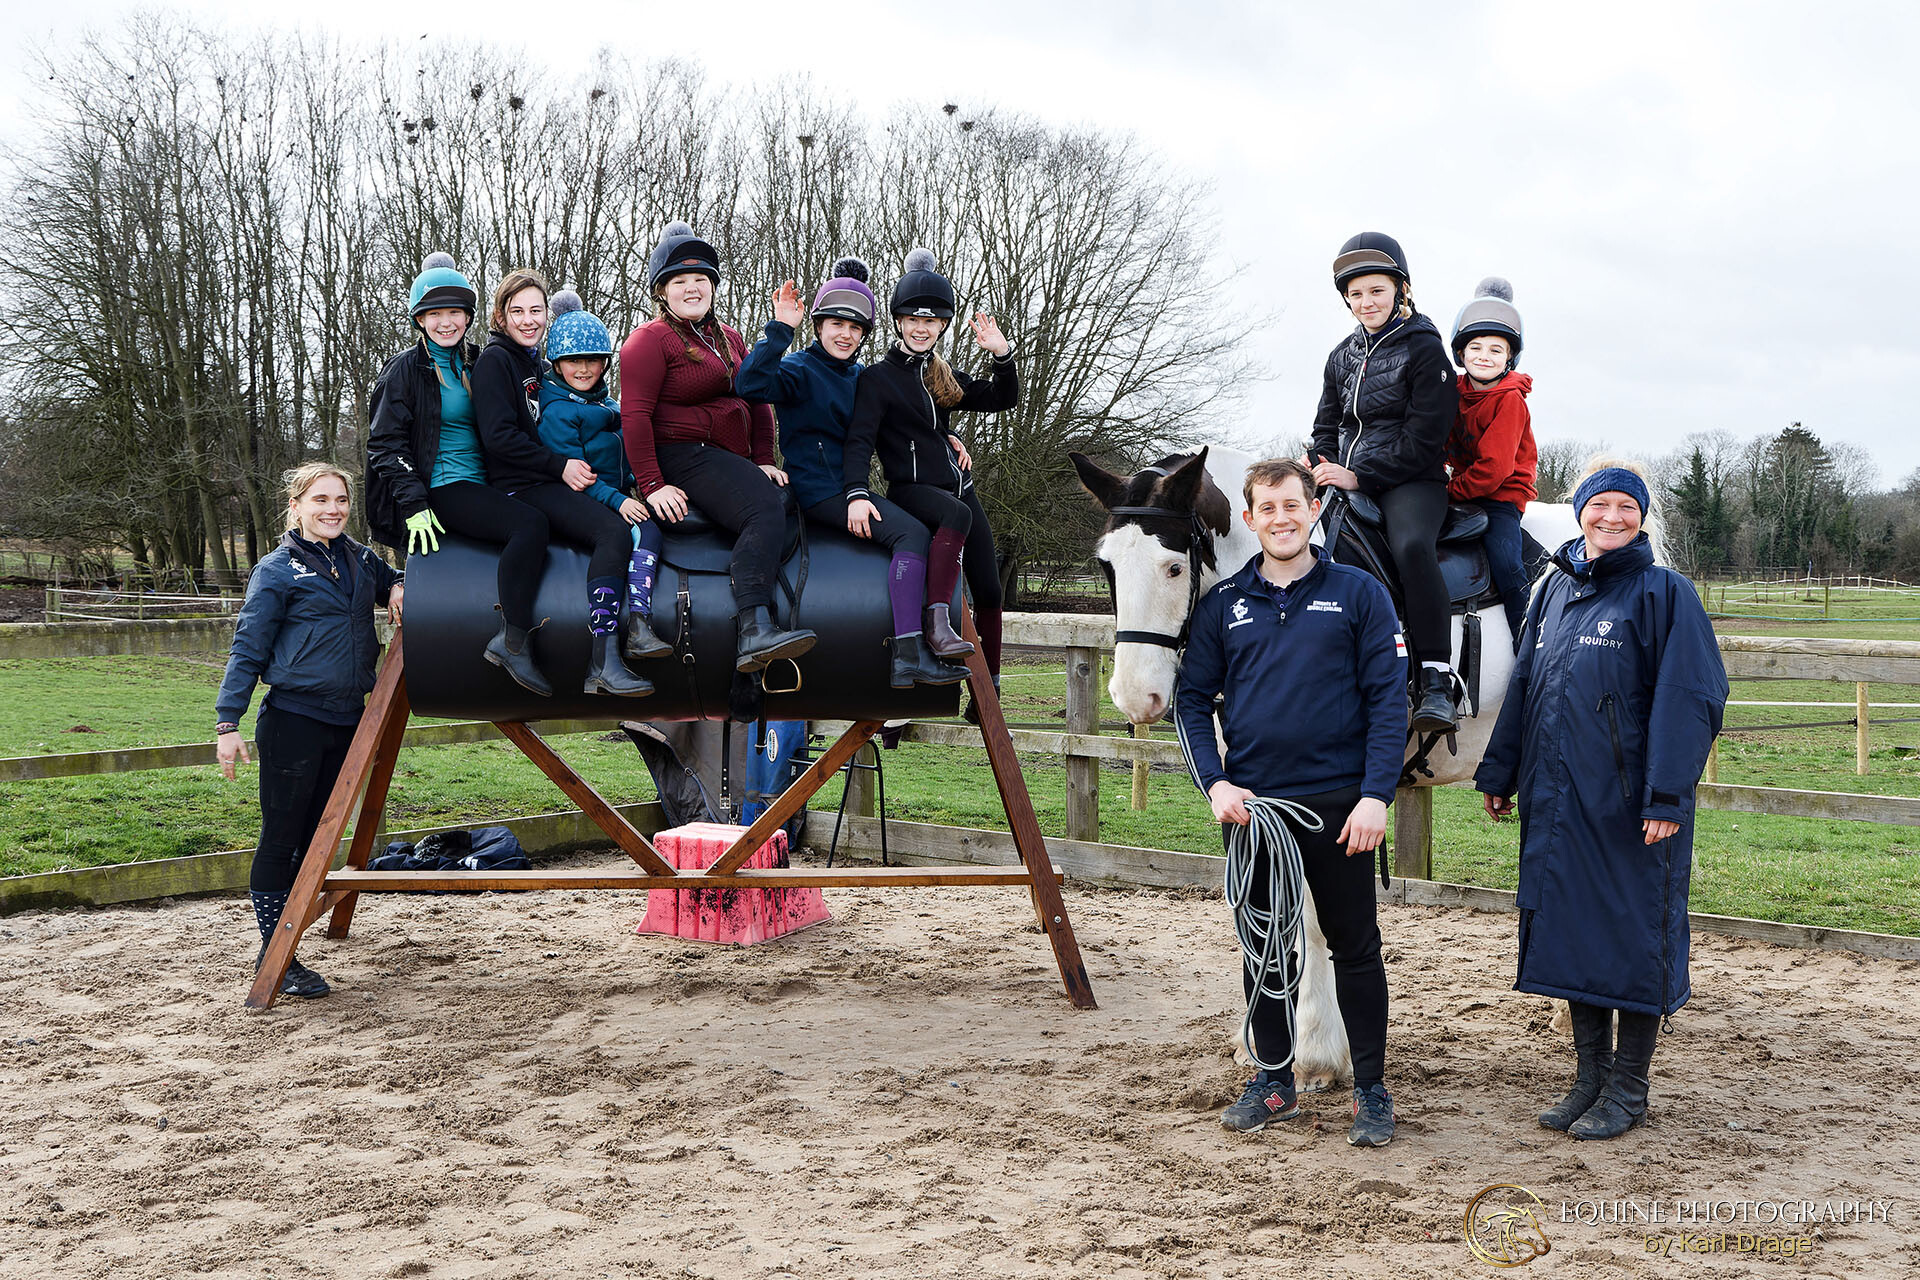 Group shot! Trick riding taster lesson with the Knights of Middle England